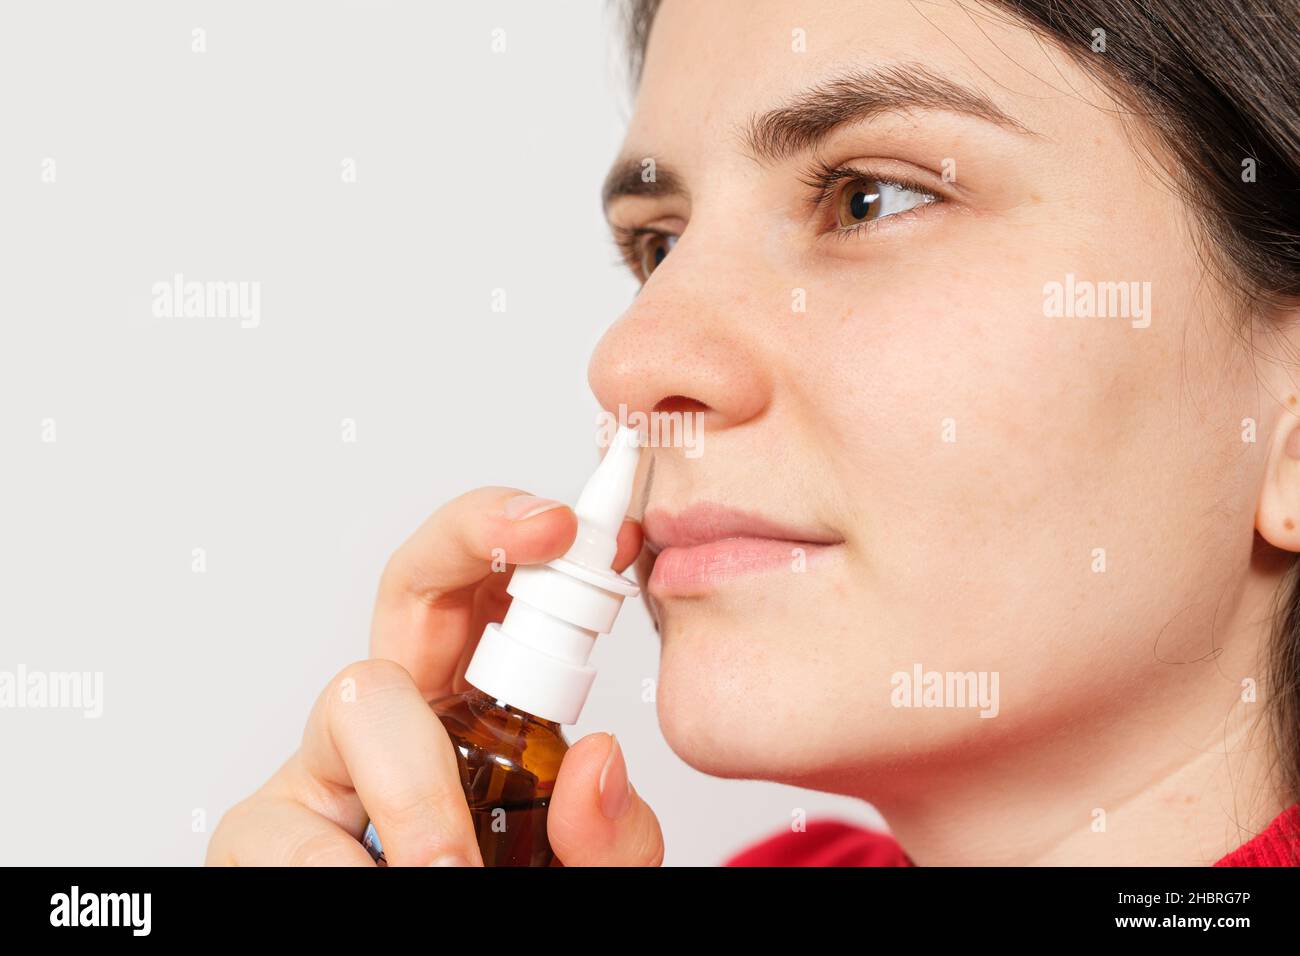 A female patient shoves a spray into the nose to treat rhinitis, an allergy with difficulty breathing. Copy text space. Stock Photo